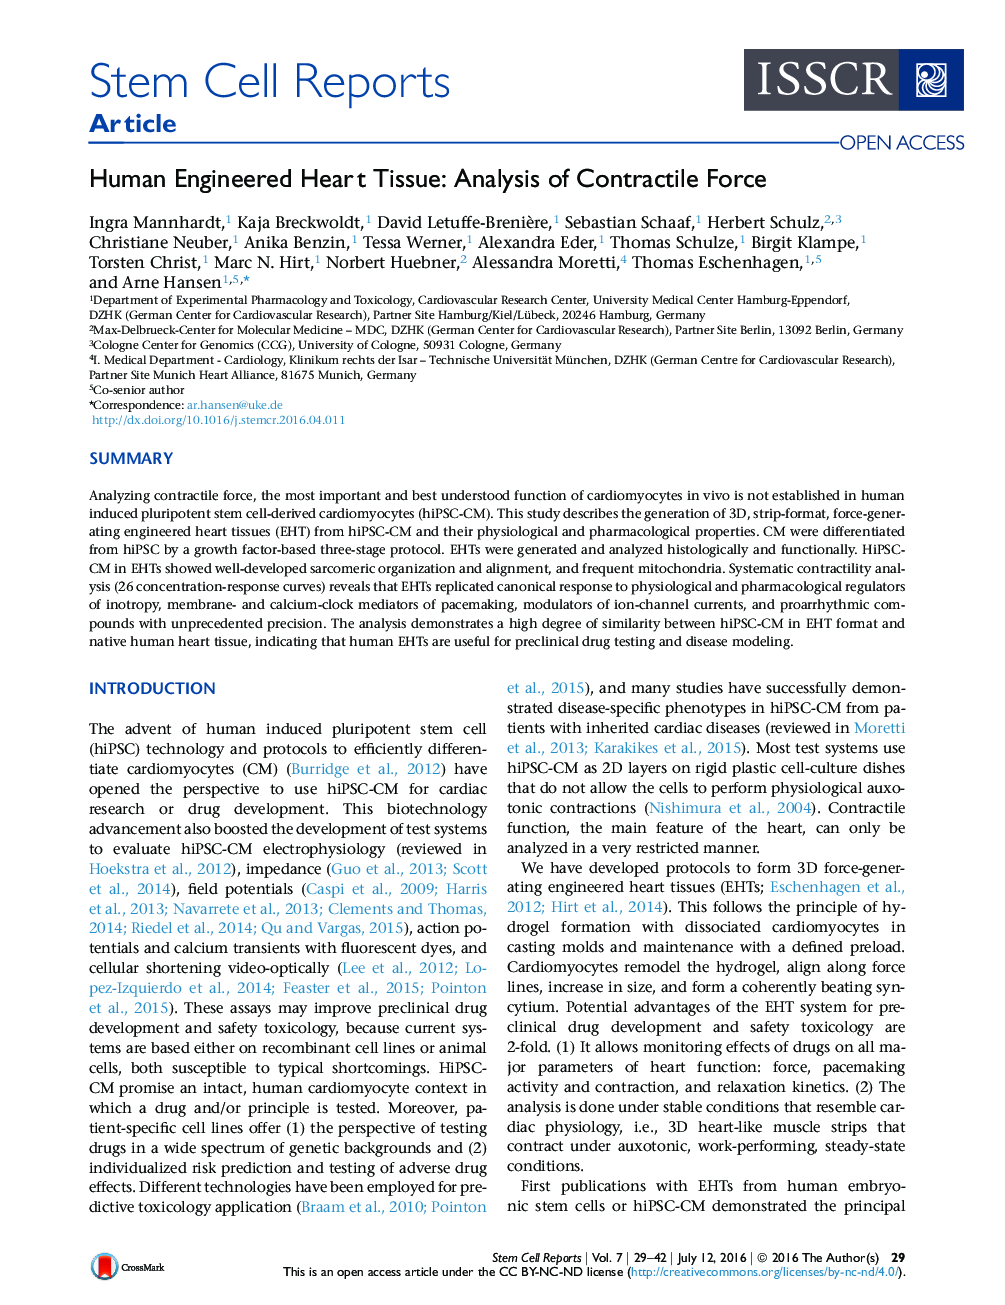 Human Engineered Heart Tissue: Analysis of Contractile Force